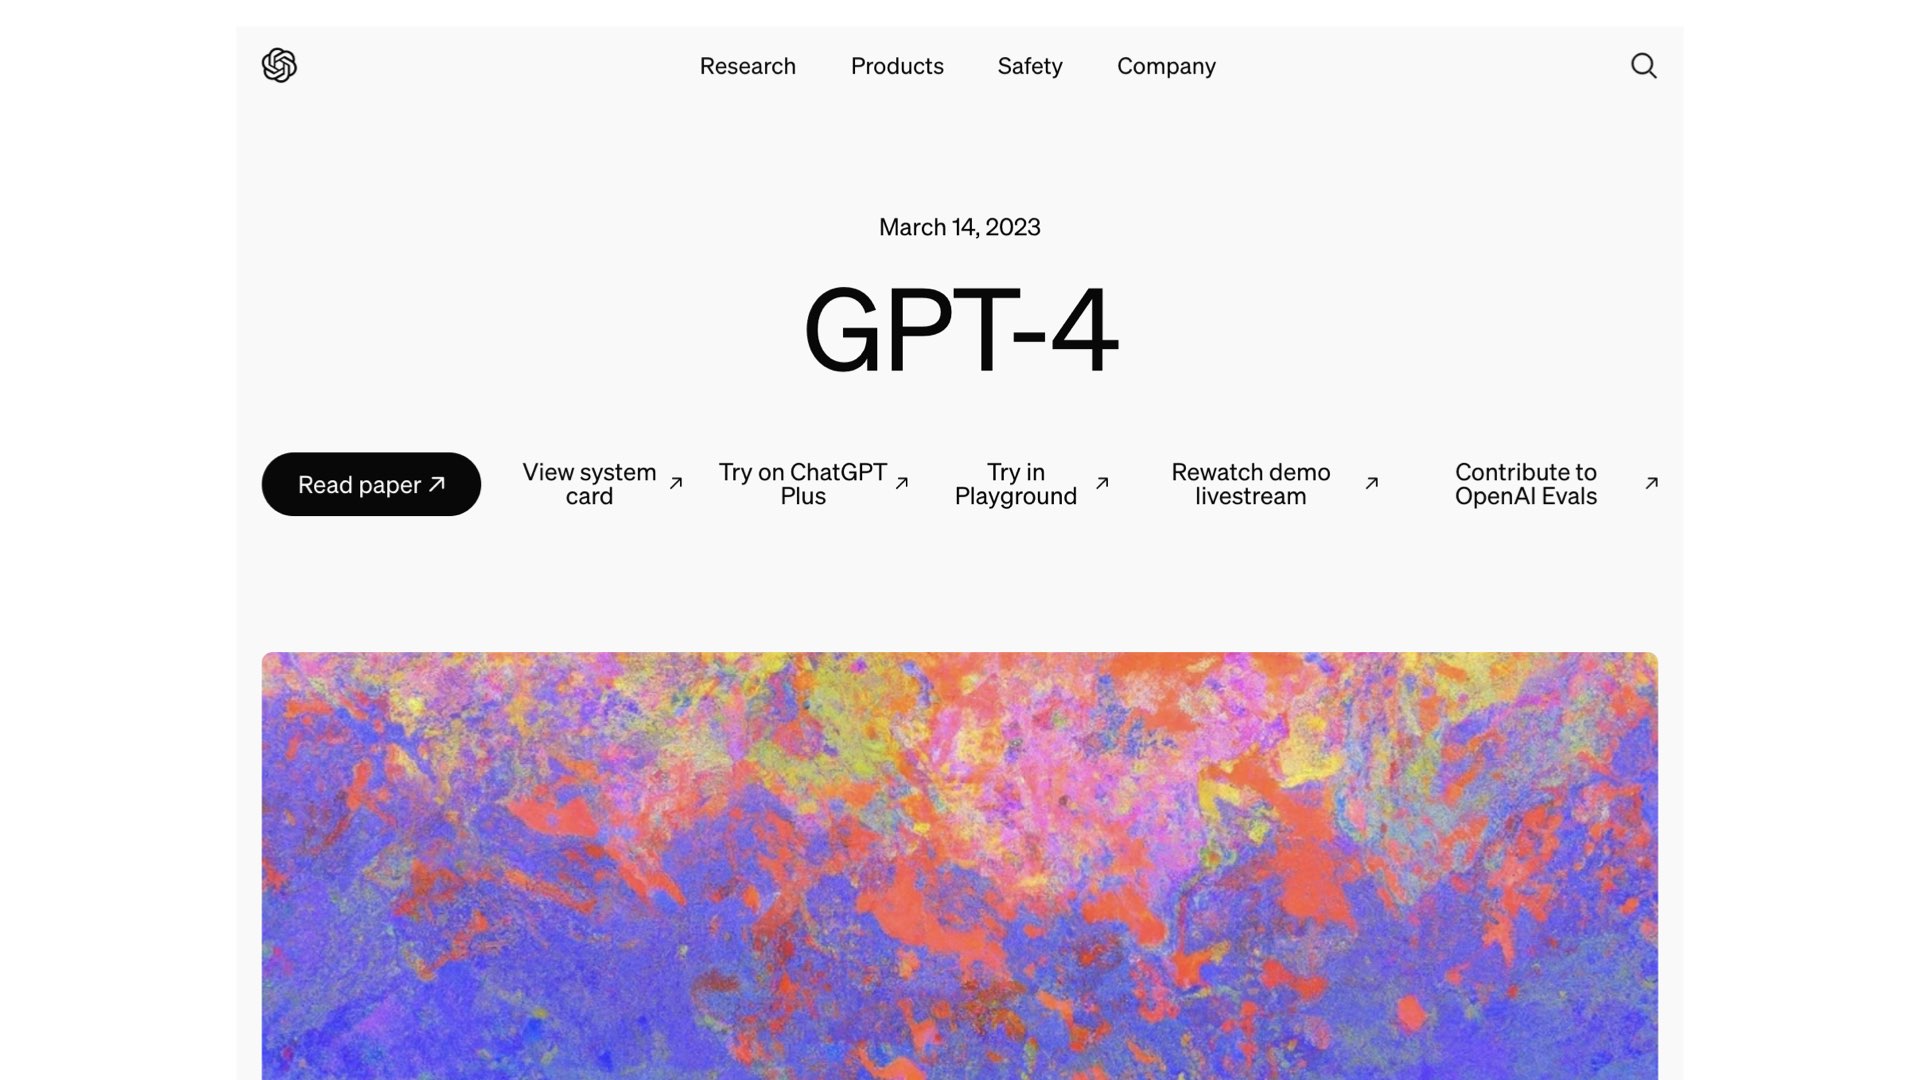 March 14, 2023: GPT-4 - screenshot of the OpenAI launch announcement